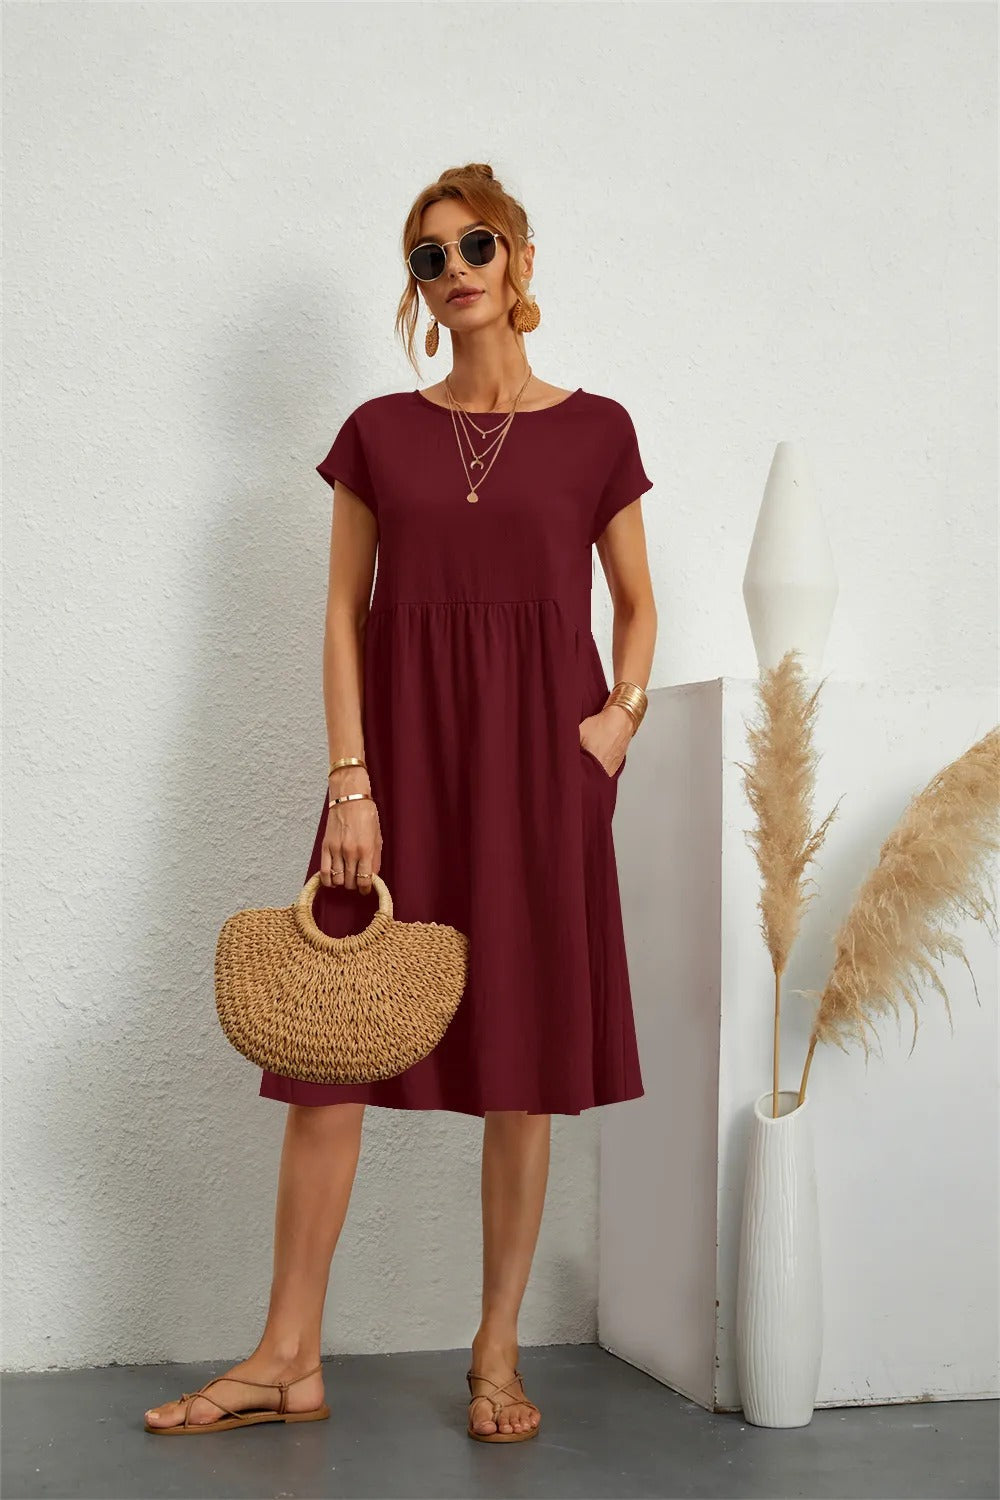 OLIVIA - O-NECK CASUAL SUMMER DRESS WITH LOOSE FIT